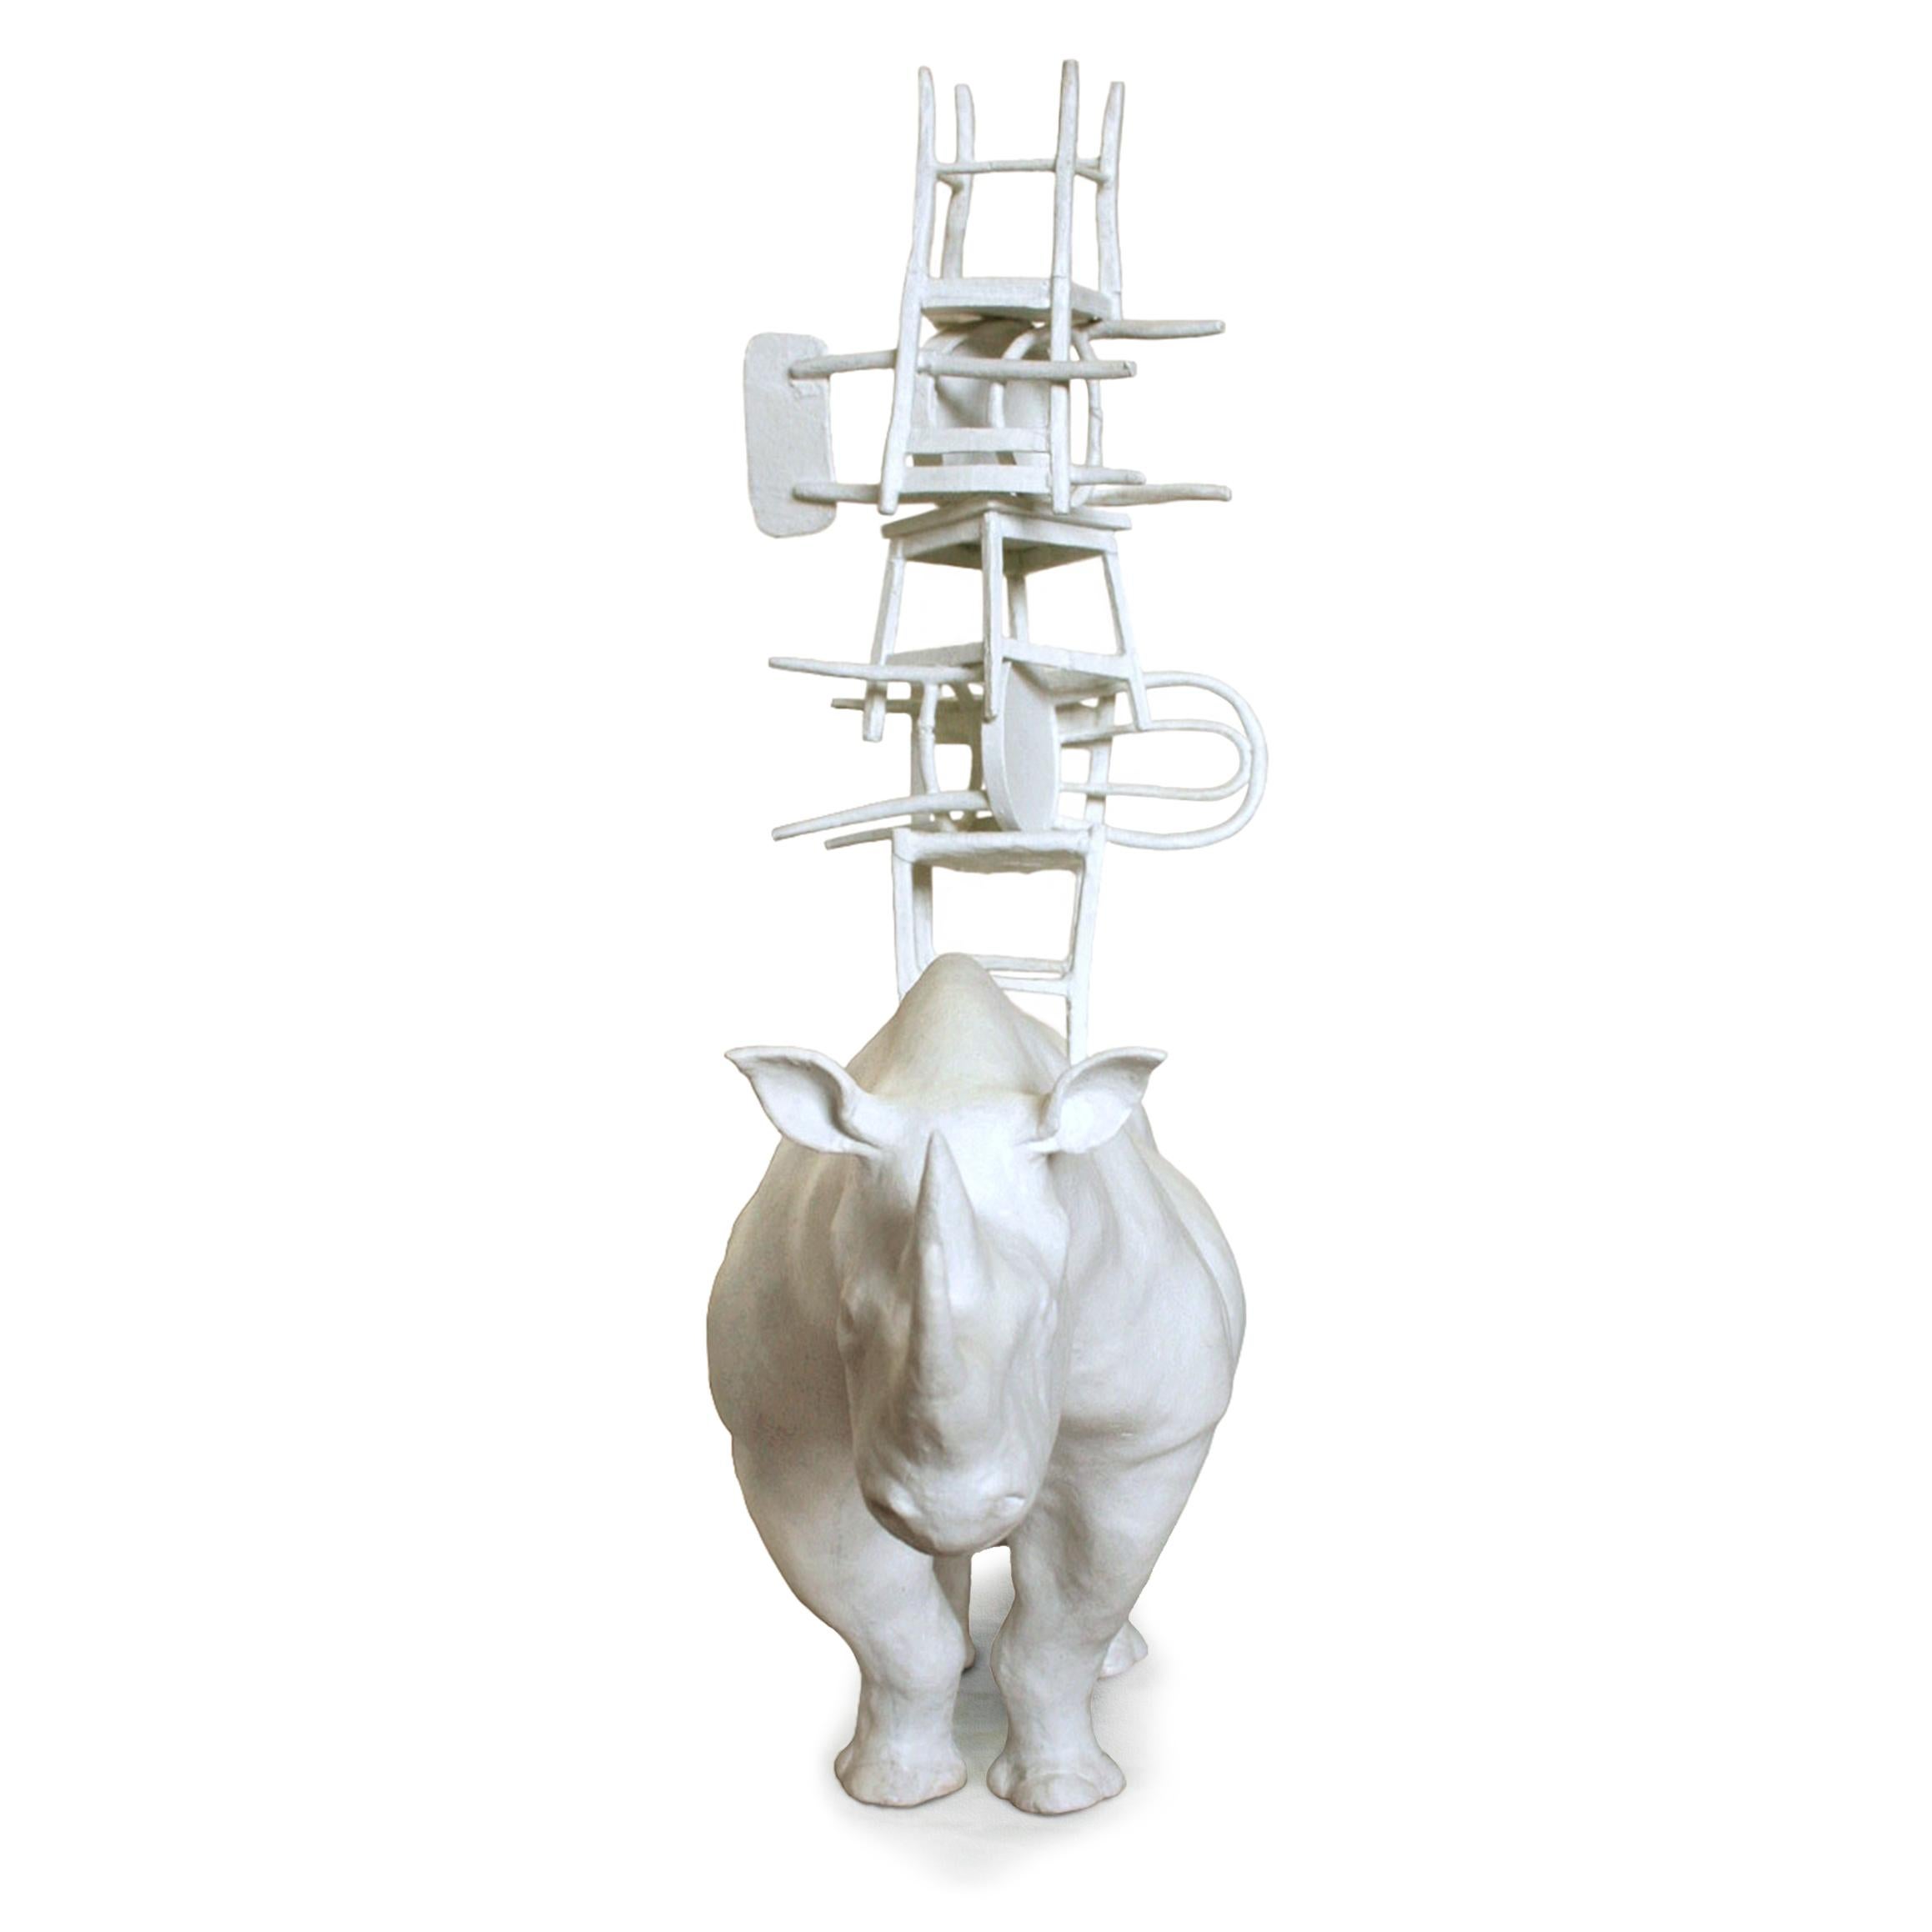 Italian 21st Century Rhino with Chairs Sculpture by Marcantonio, White Painted Bronze For Sale